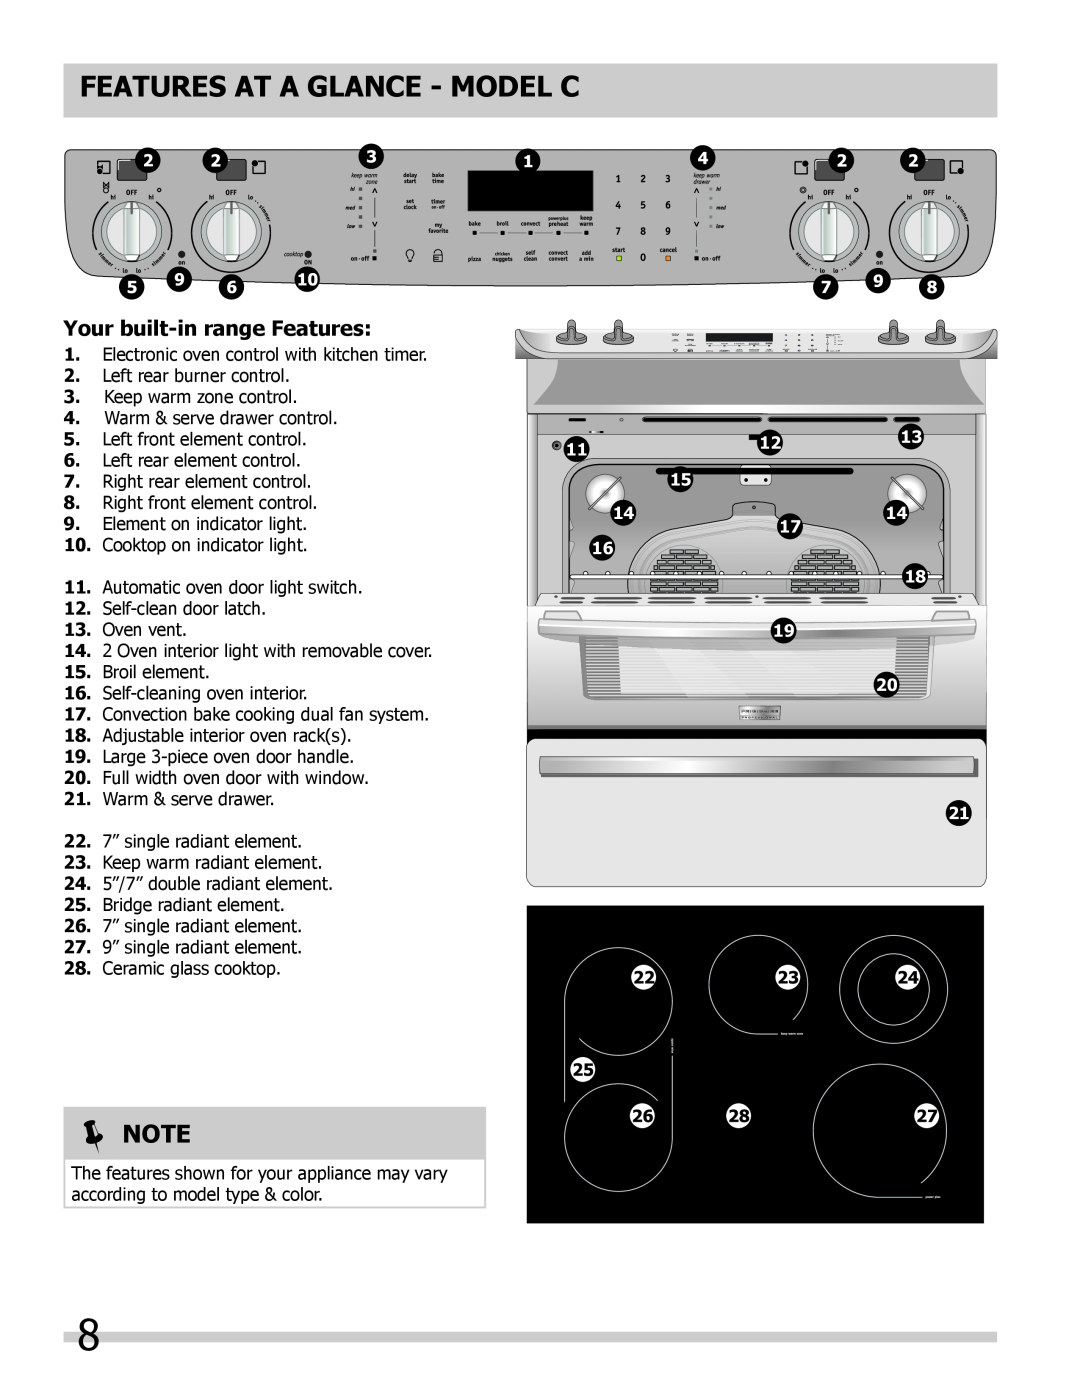 Frigidaire FGES3065KB, FGES3065KF, FGES3045KF Features At A Glance - Model C,  Note, Your built-in range Features 